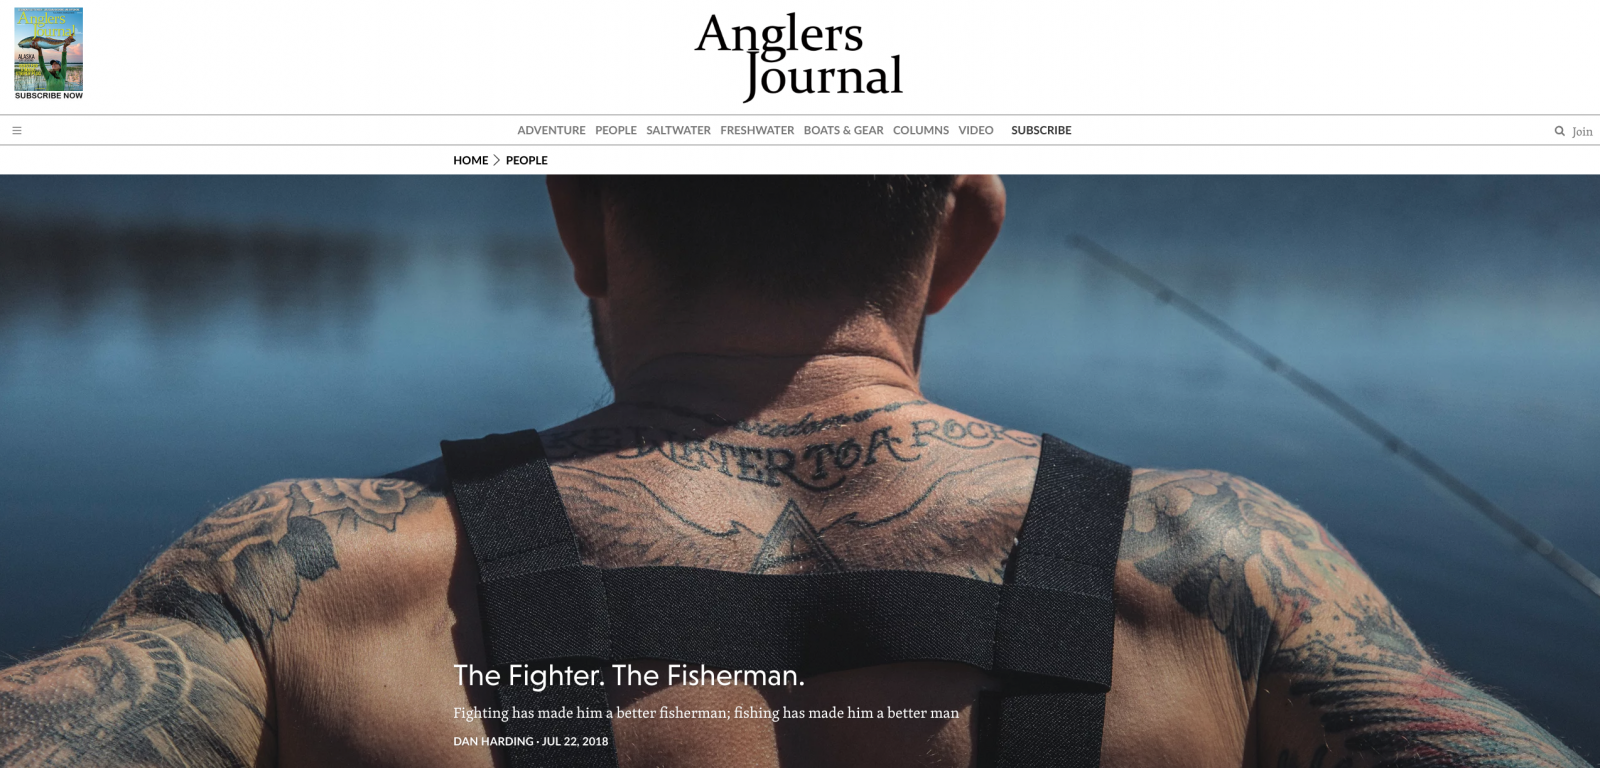 for The Anglers Journal: The Fighter. The Fisherman.